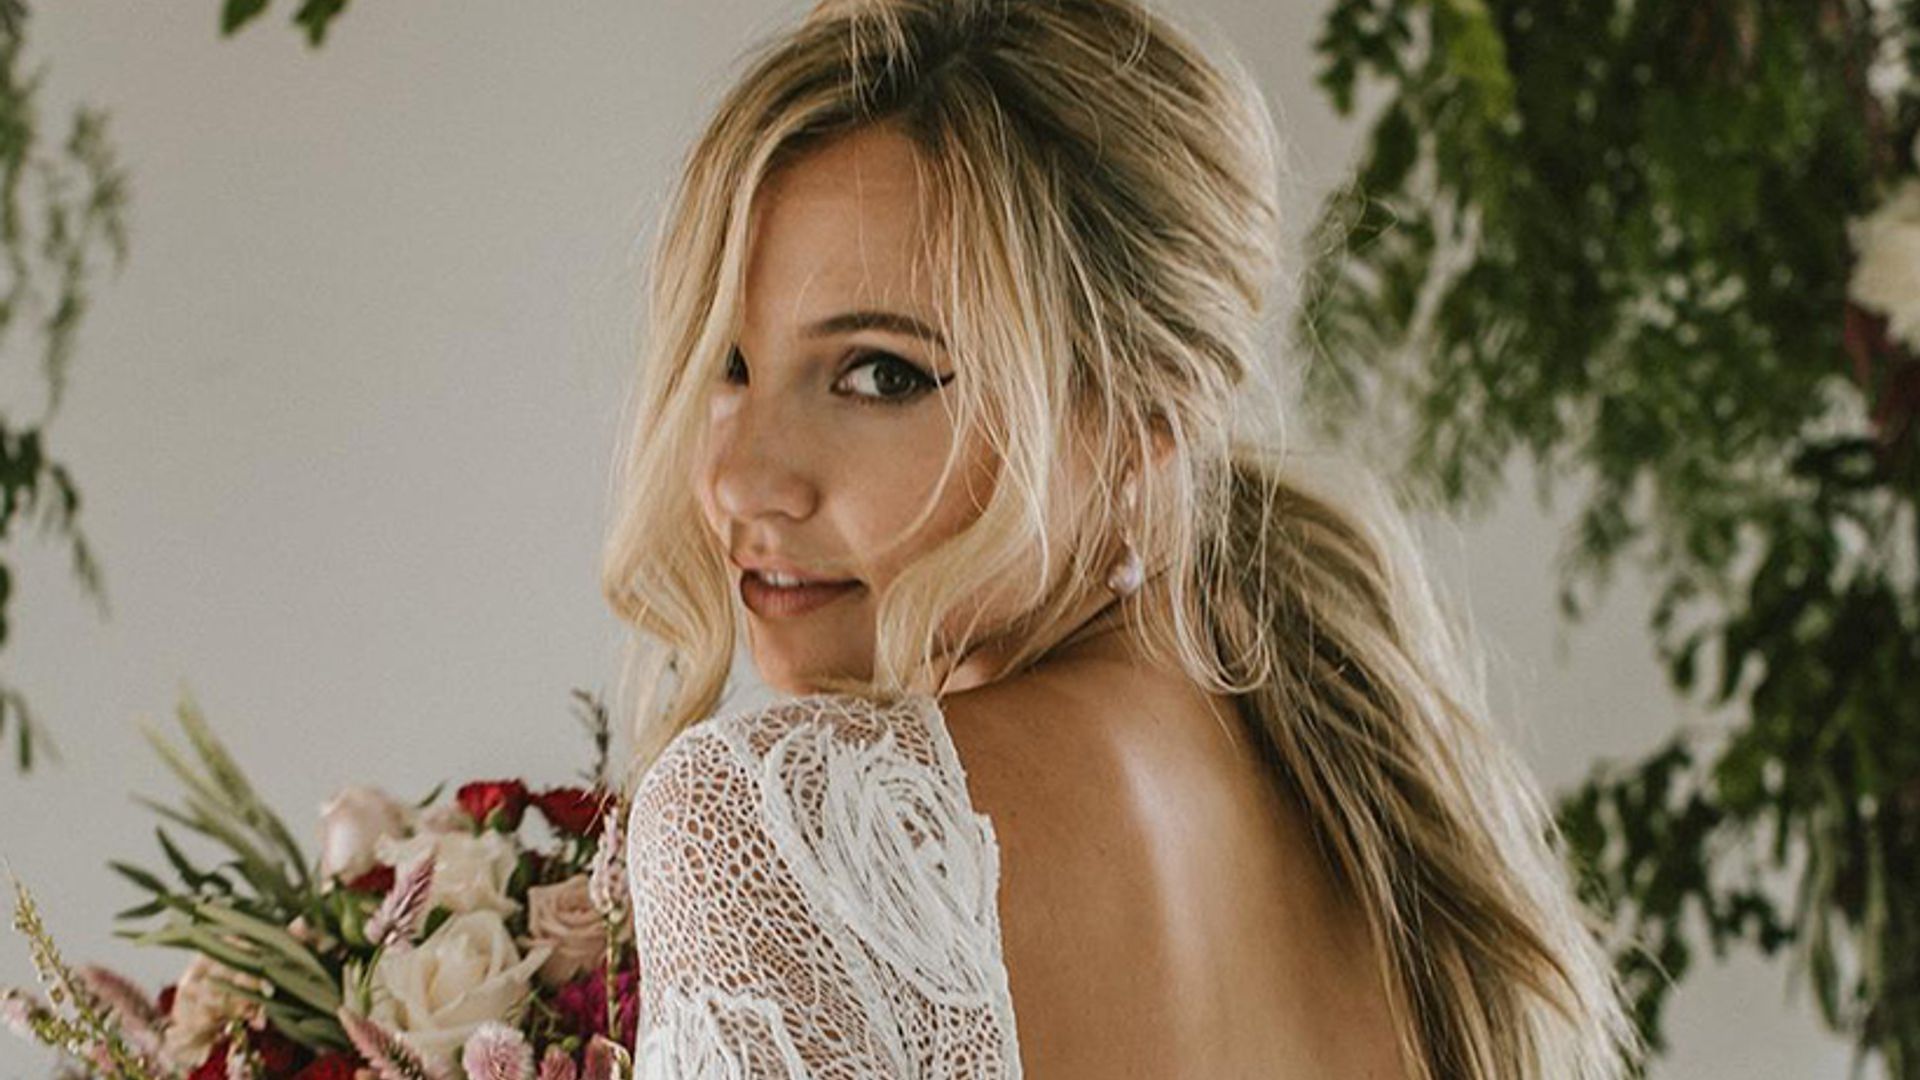 Pinterest's favourite wedding dress is by Grace Loves Lace - and it's so beautiful